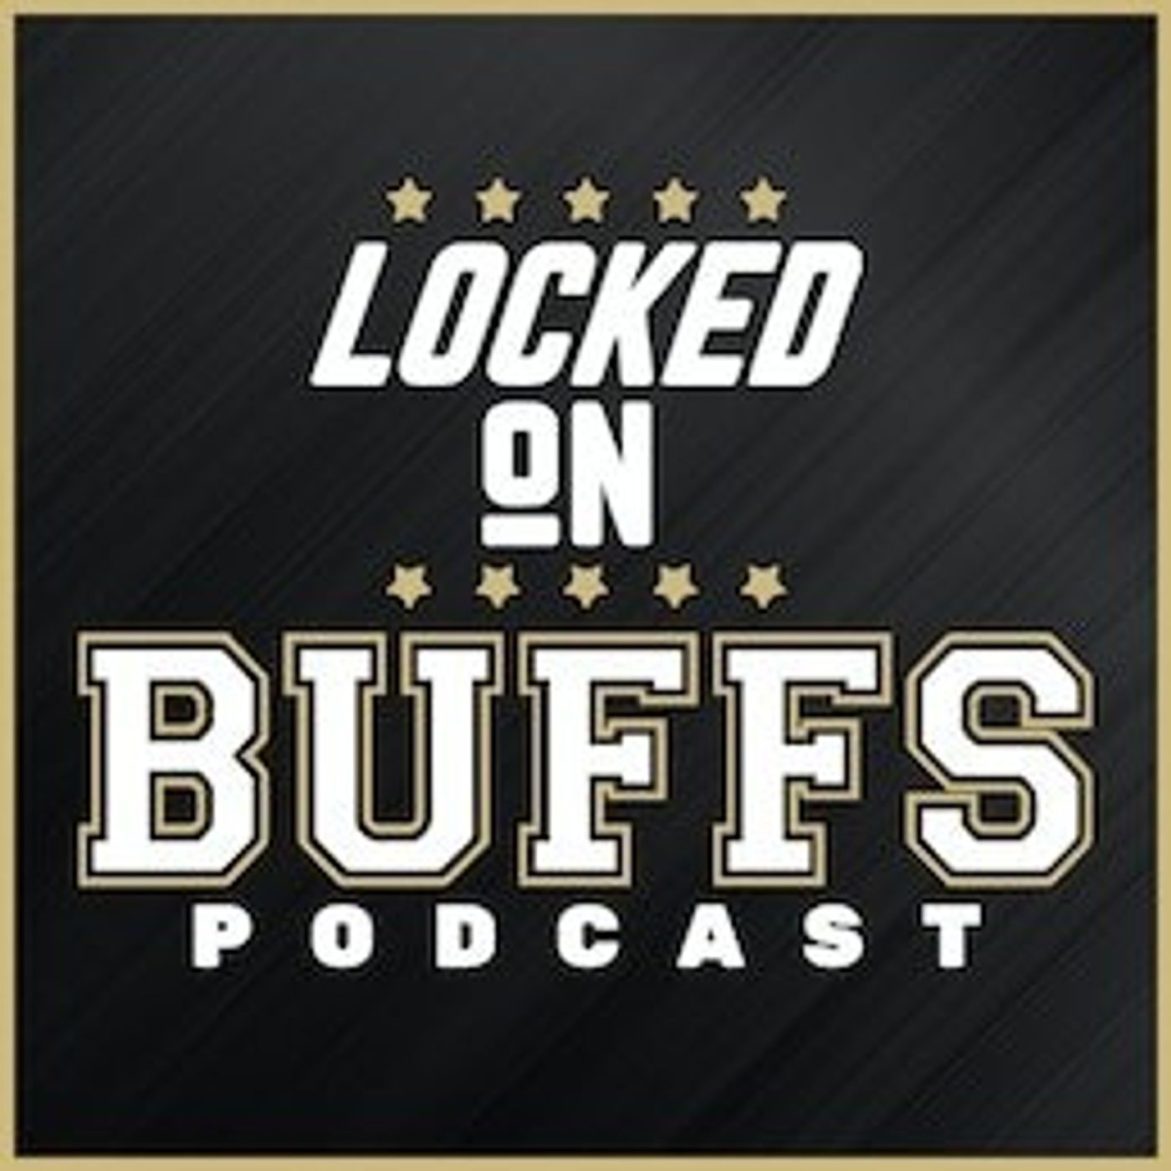 Black Podcasting - Can Deion Sanders bring in a top recruiting class or should fans be worried?